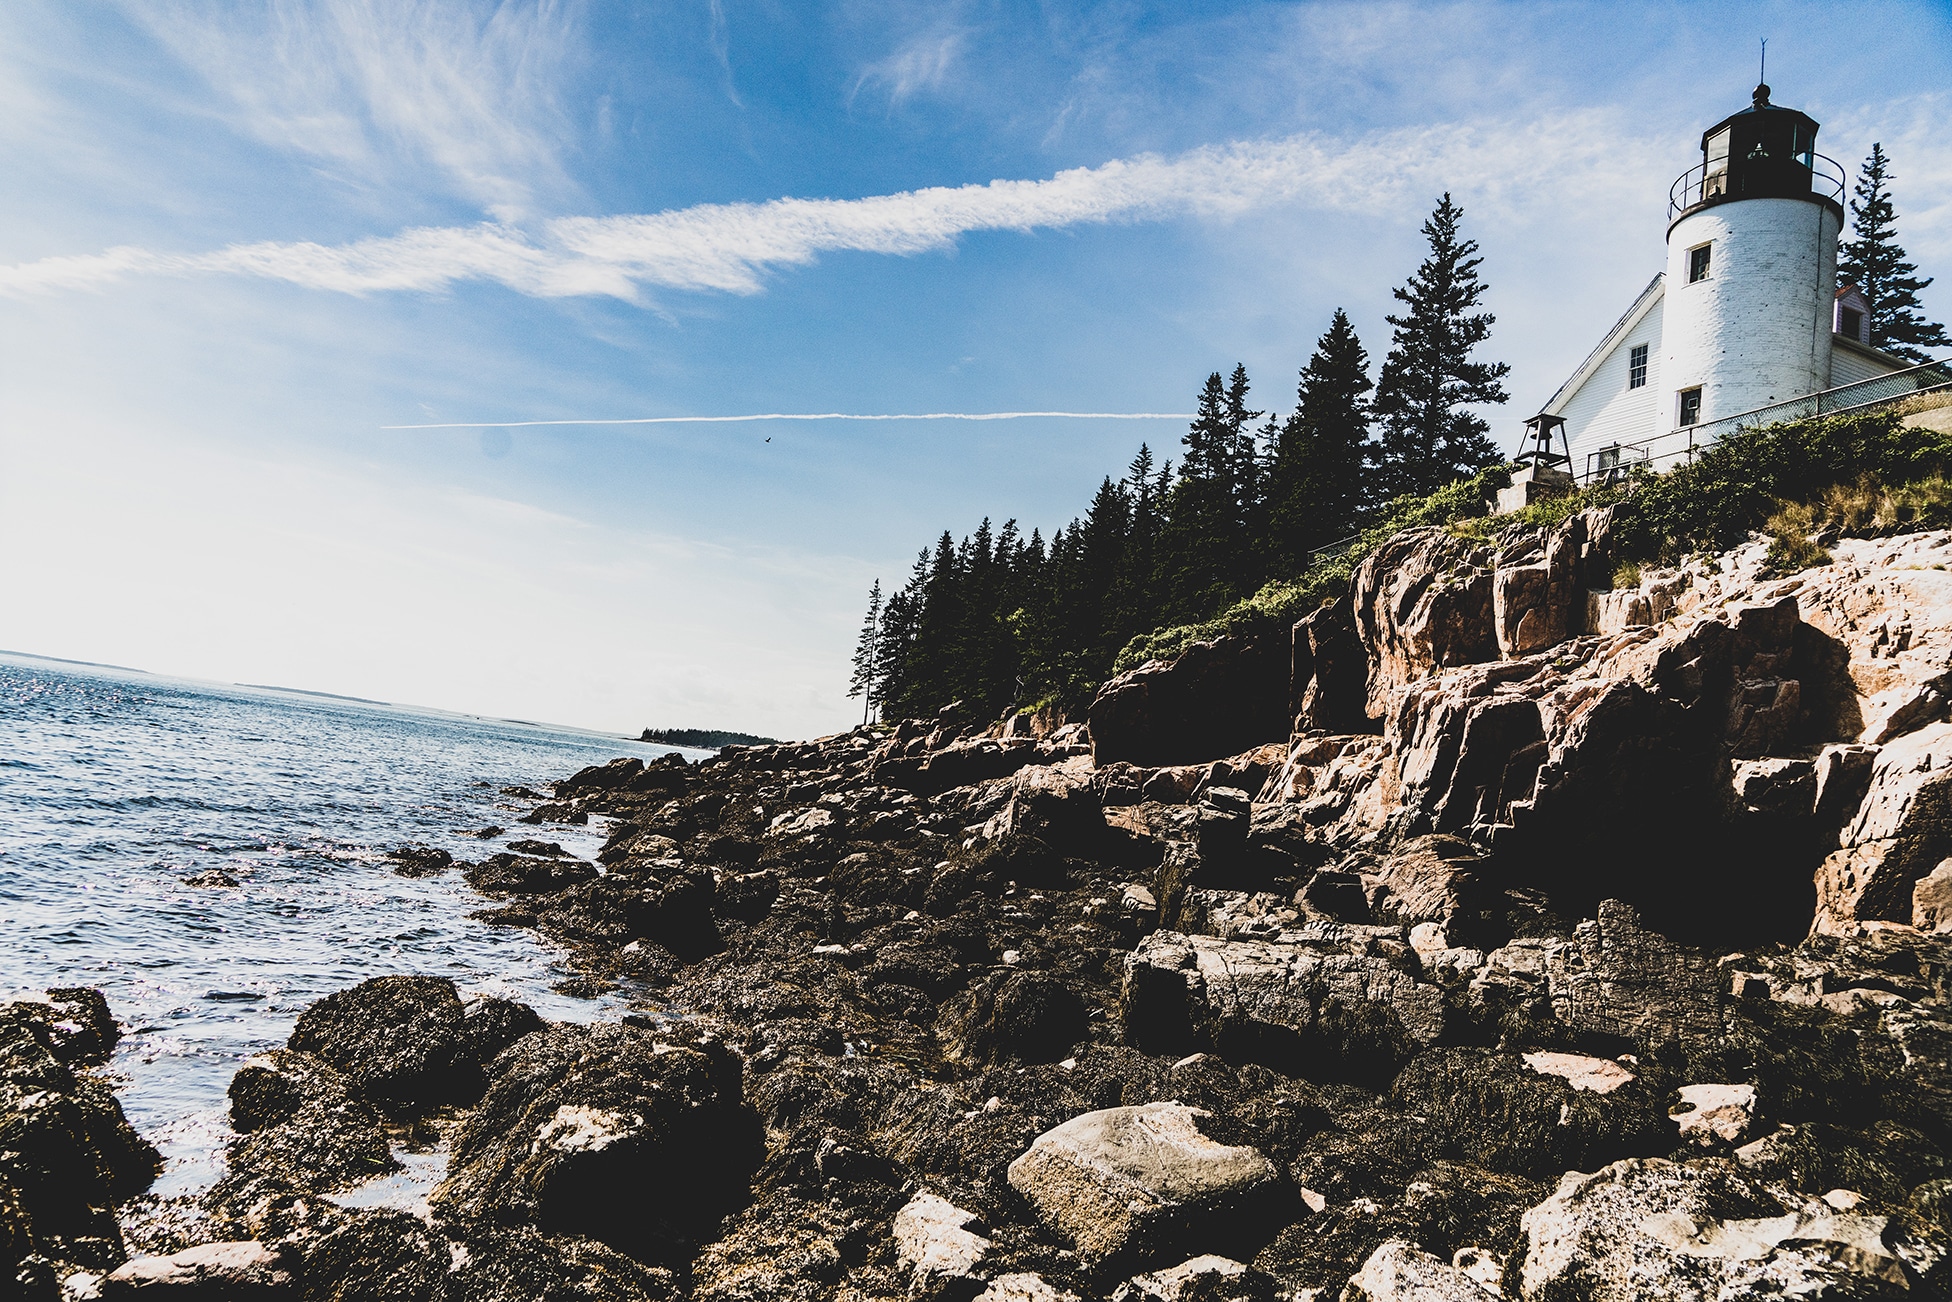 Acadia National Park is a perfect group destination for adventure seekers